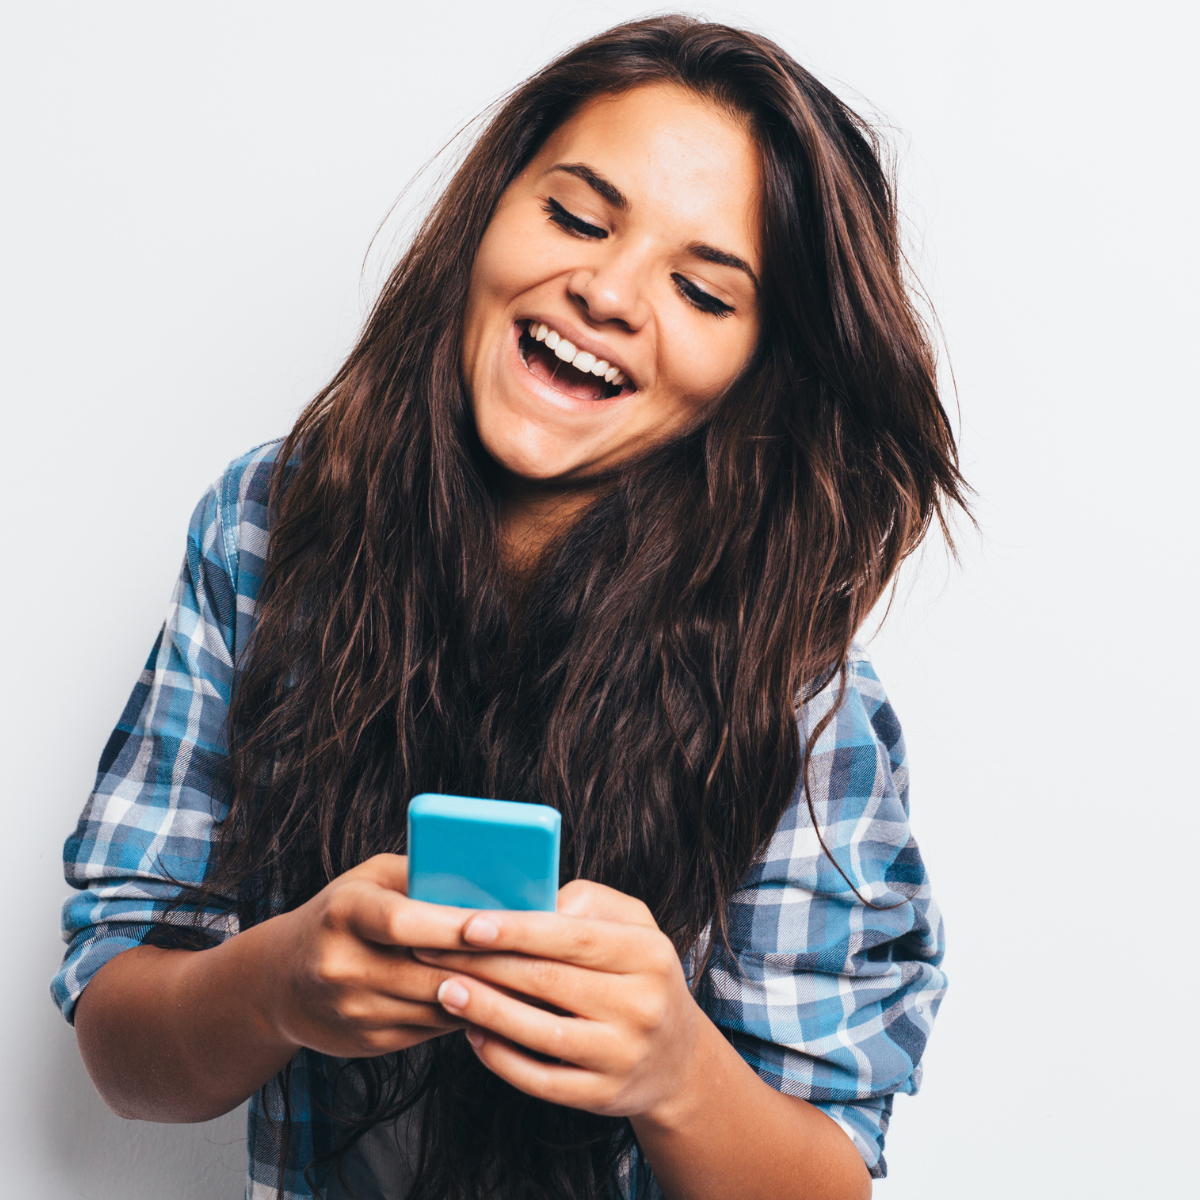 Girl laughing while texting - Featured In: Signs A Girl Likes You Over Text